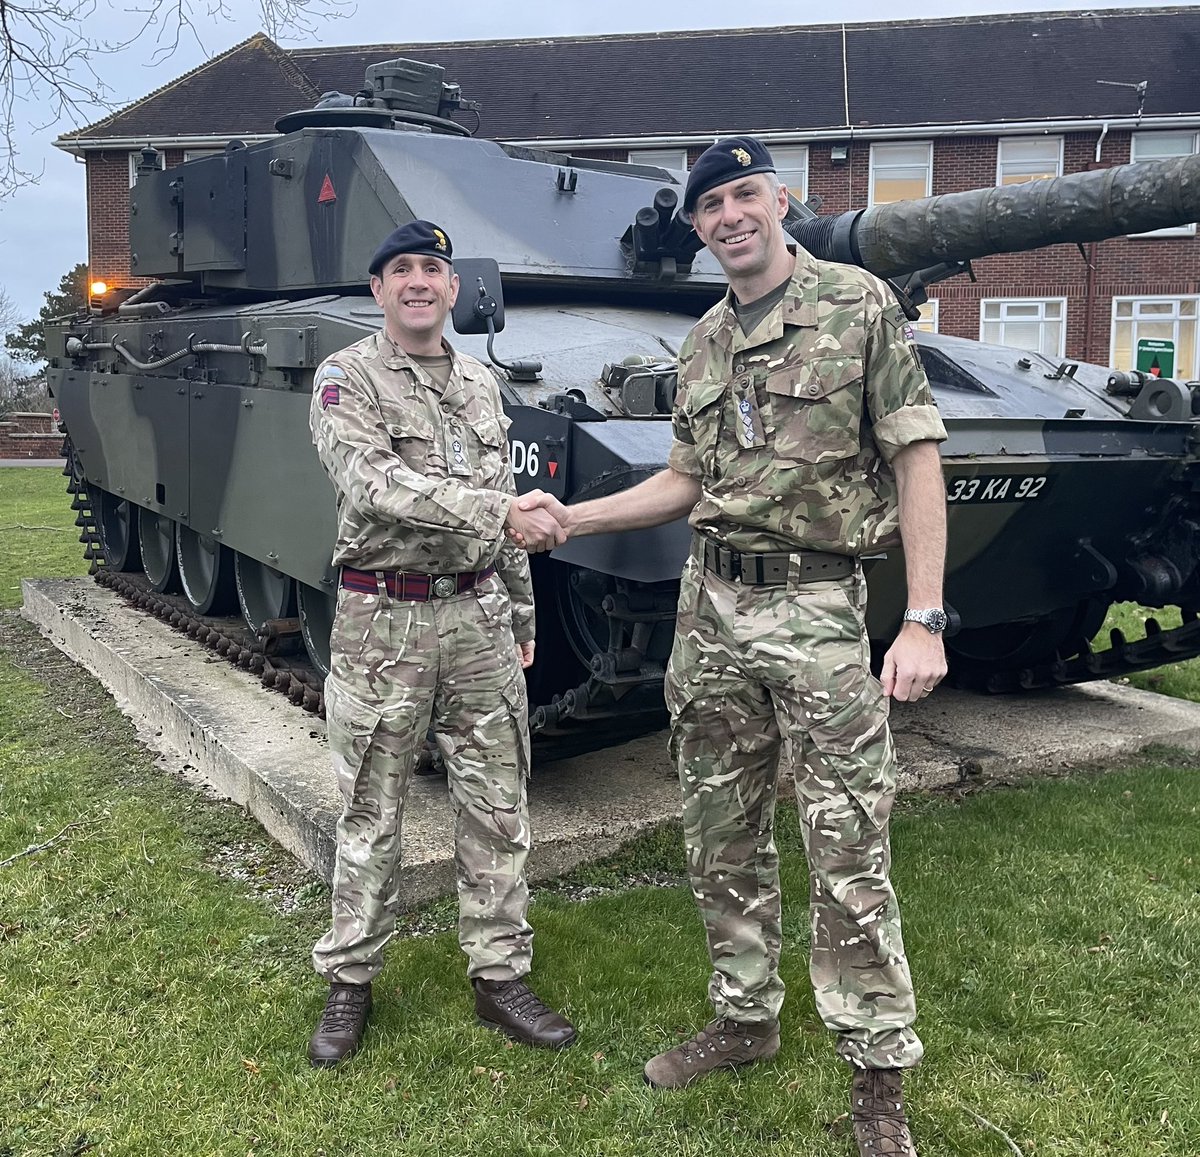 Today we welcome Col Graham RE to the HQ as the new Group Commander and Commander DEG. Lt Col Porter RE has been holding the fort and we thank him for his efforts. @3rdUKDivision